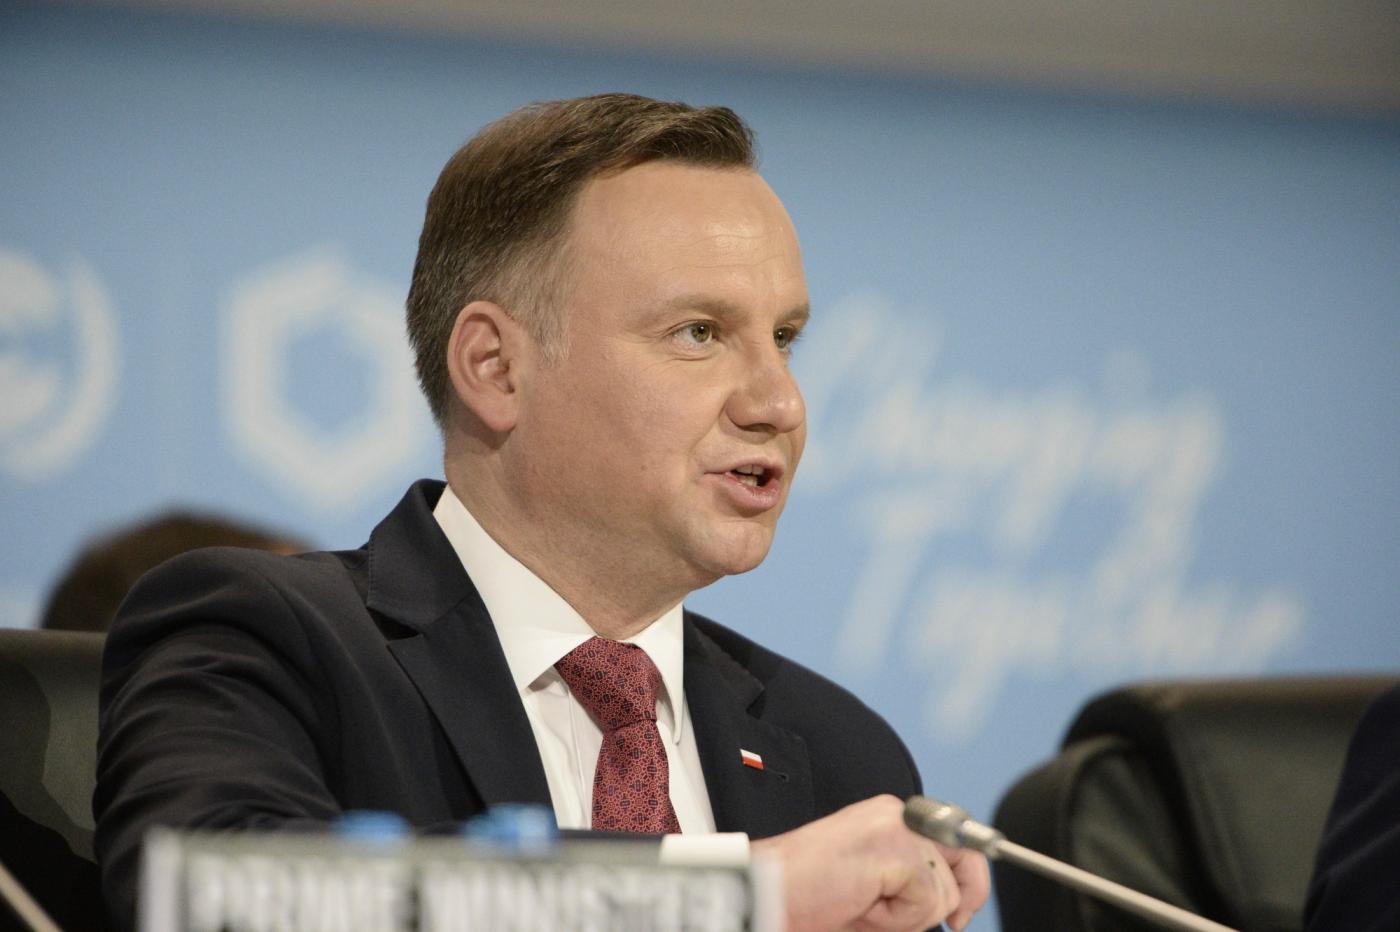 KATOWICE, Dec. 3, 2018 (Xinhua) -- Polish President Andrzej Duda addresses the UN Climate Change Conference in Katowice, Poland, Dec. 3, 2018. Delegates from nearly 200 countries began talks on Sunday on urgent actions to curb climate change three years after the landmark Paris Climate Change Agreement set a goal of keeping global warming below 2 degrees Celsius. The two-week UN Climate Change Conference, known as COP24, is held in the southern Polish city of Katowice. (Xinhua/Jaap Arriens/IANS) by .